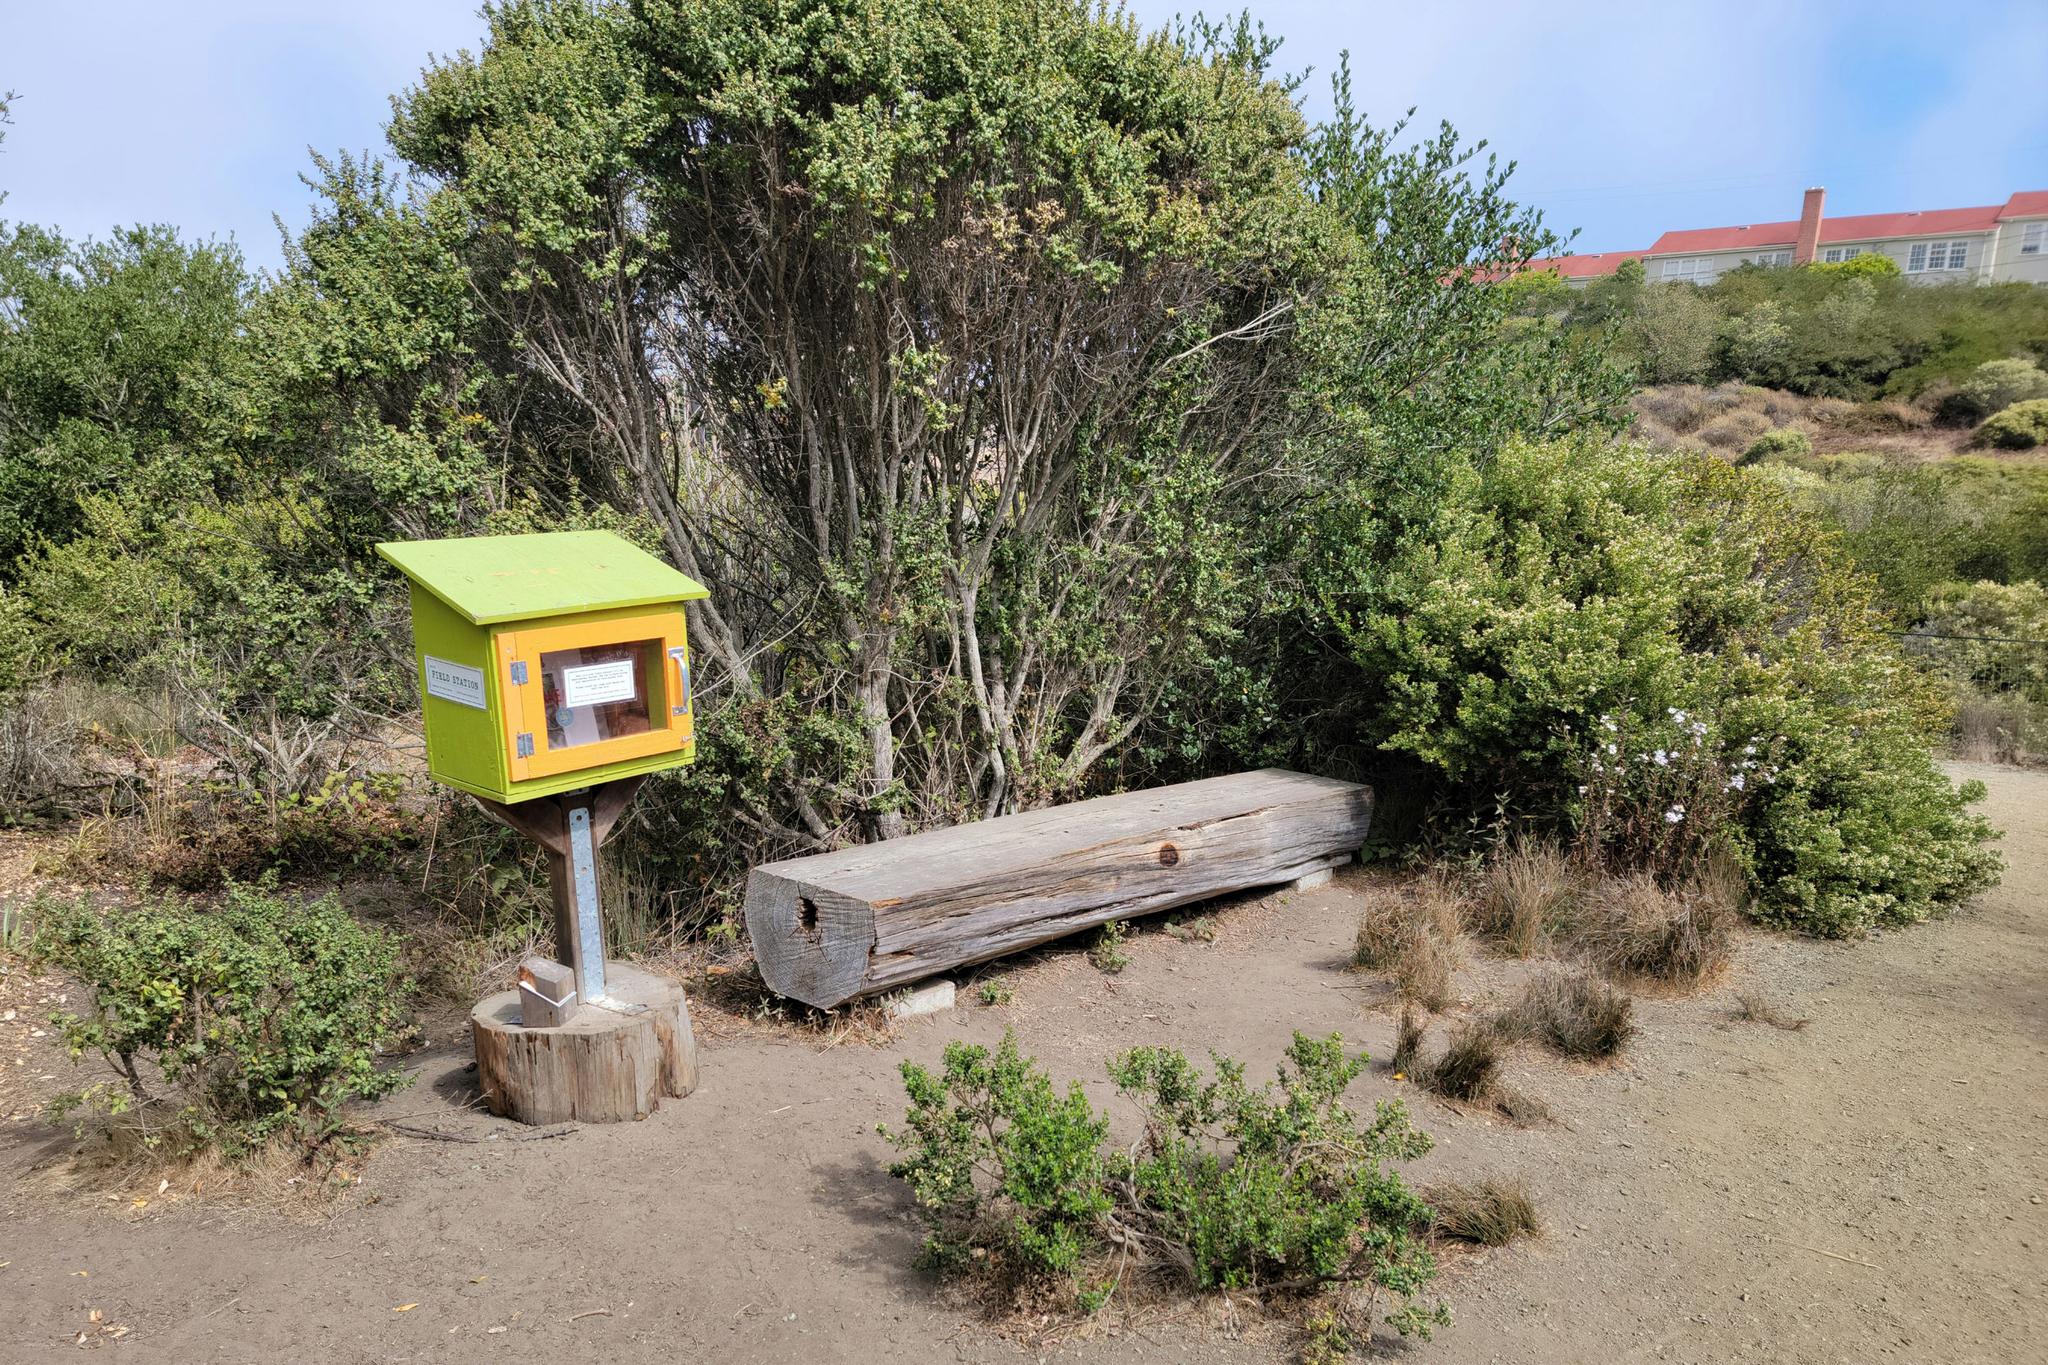 A ”book nook” with tools to experience nature at El Polin Spring, located next to a bench.